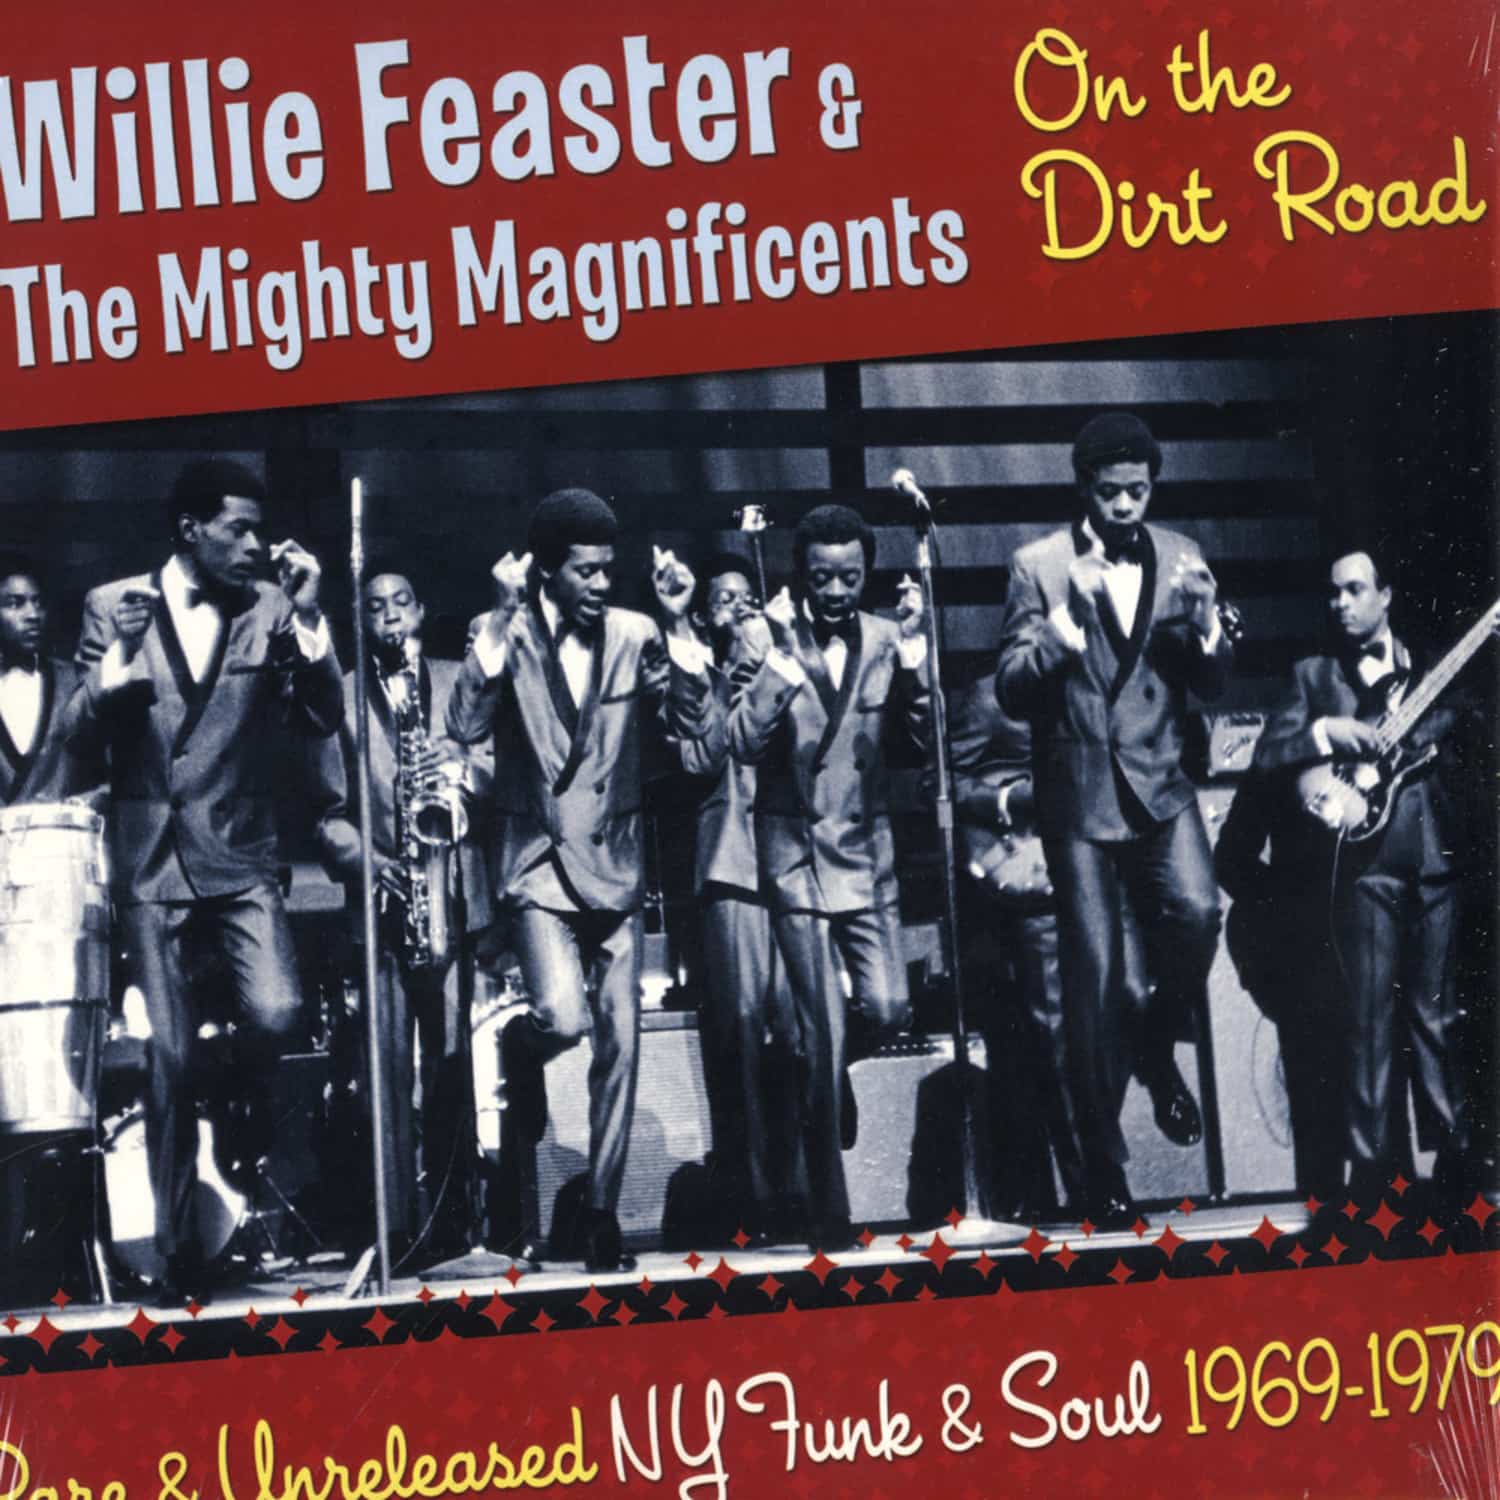 Willie Feaster - ON THE DIRT ROAD 